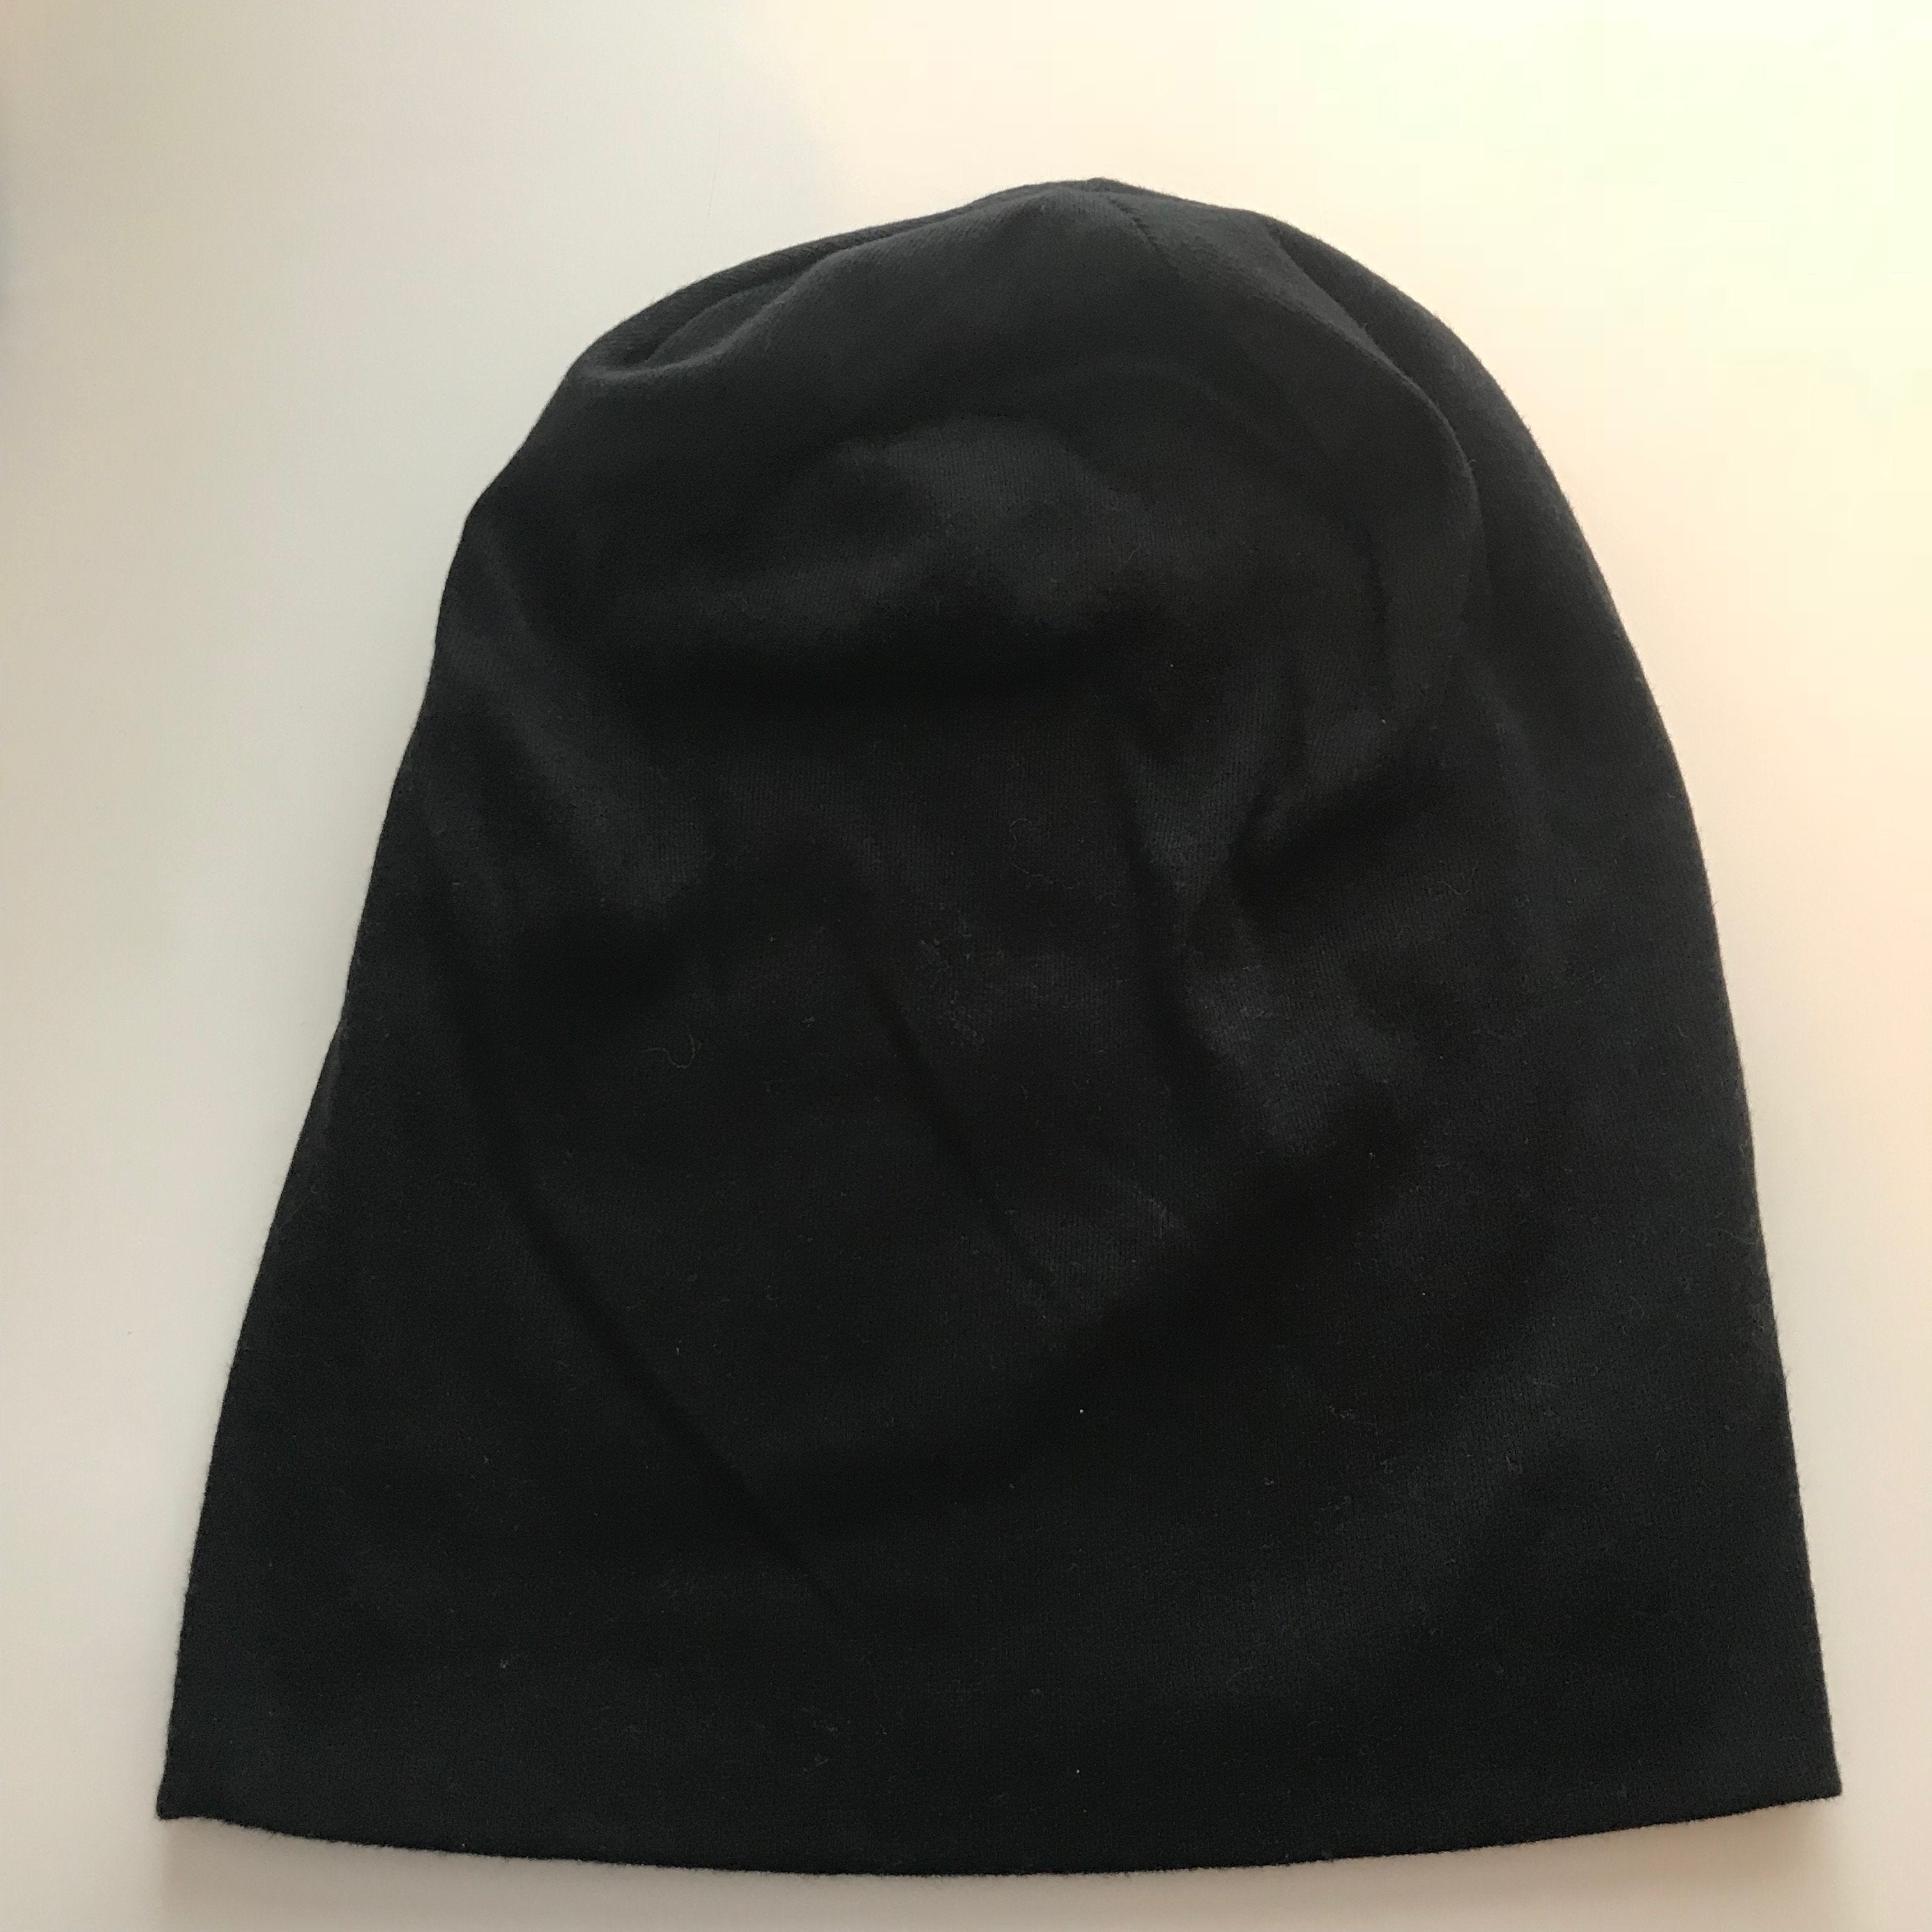 The Cotton Solid Beanie